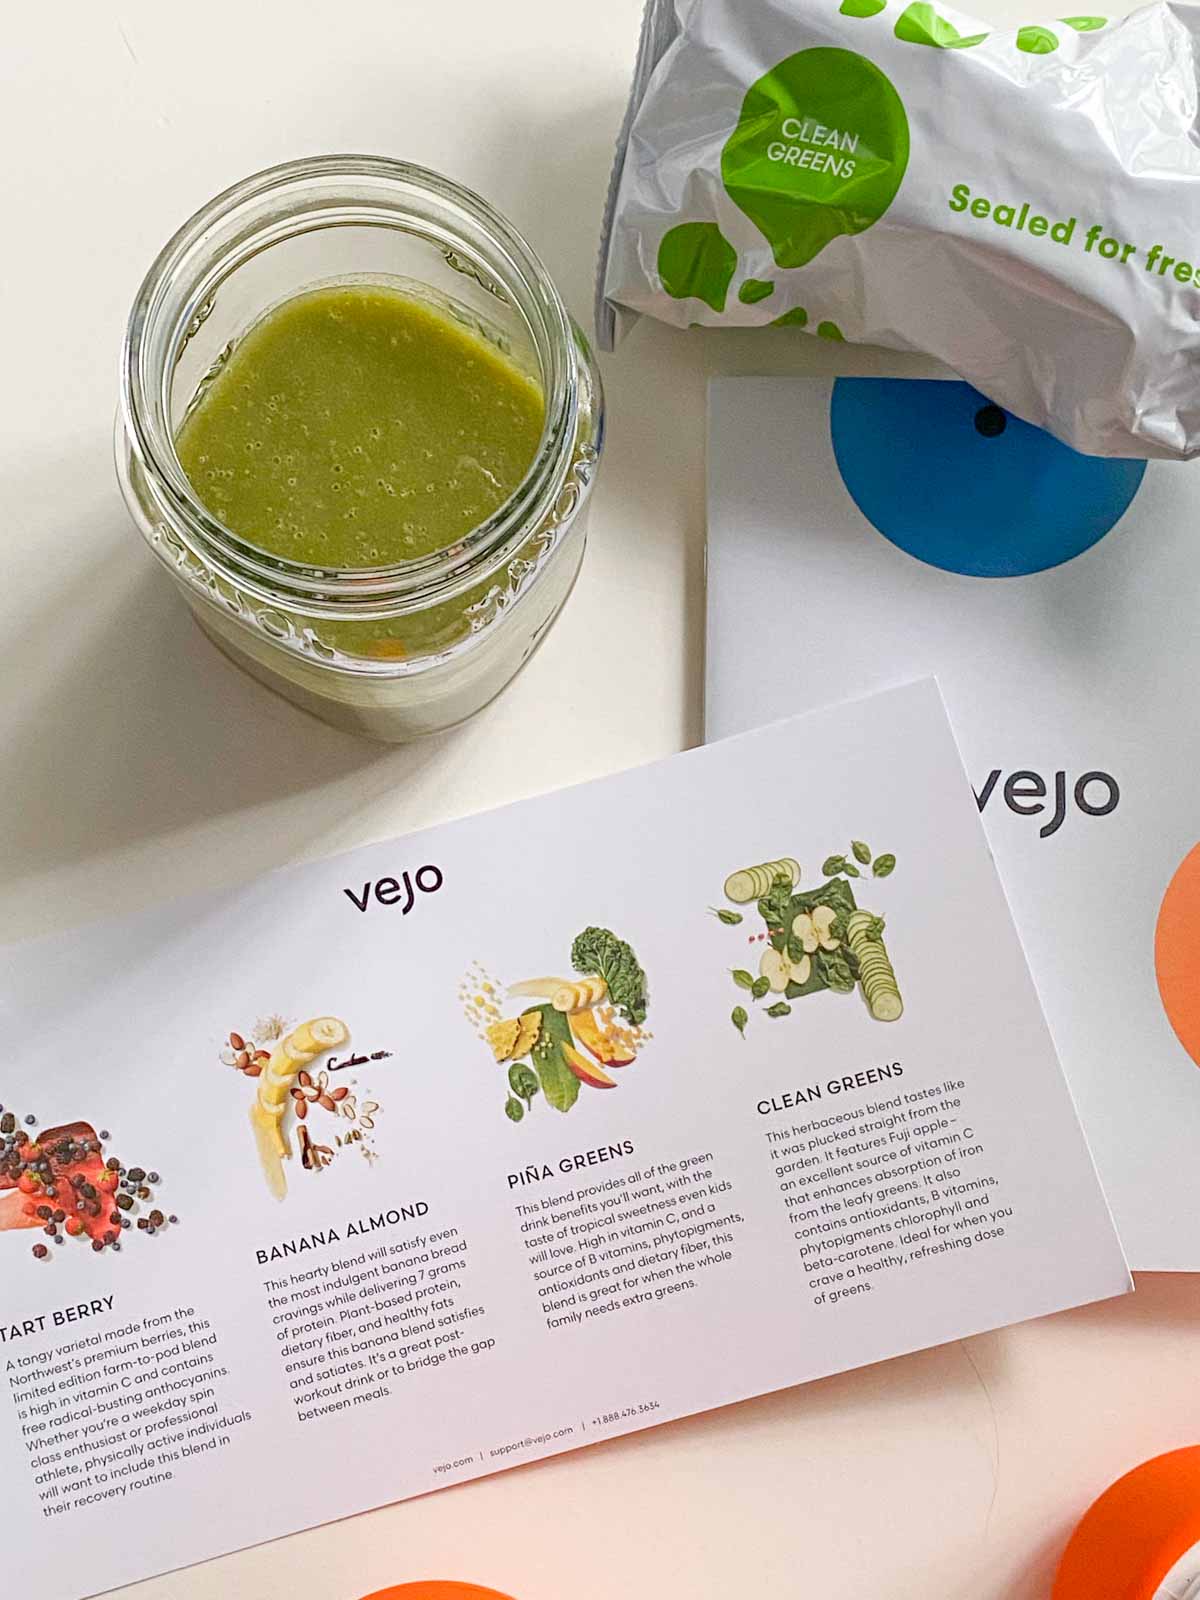 Clean green iuice with vejo info facts card - vejo review